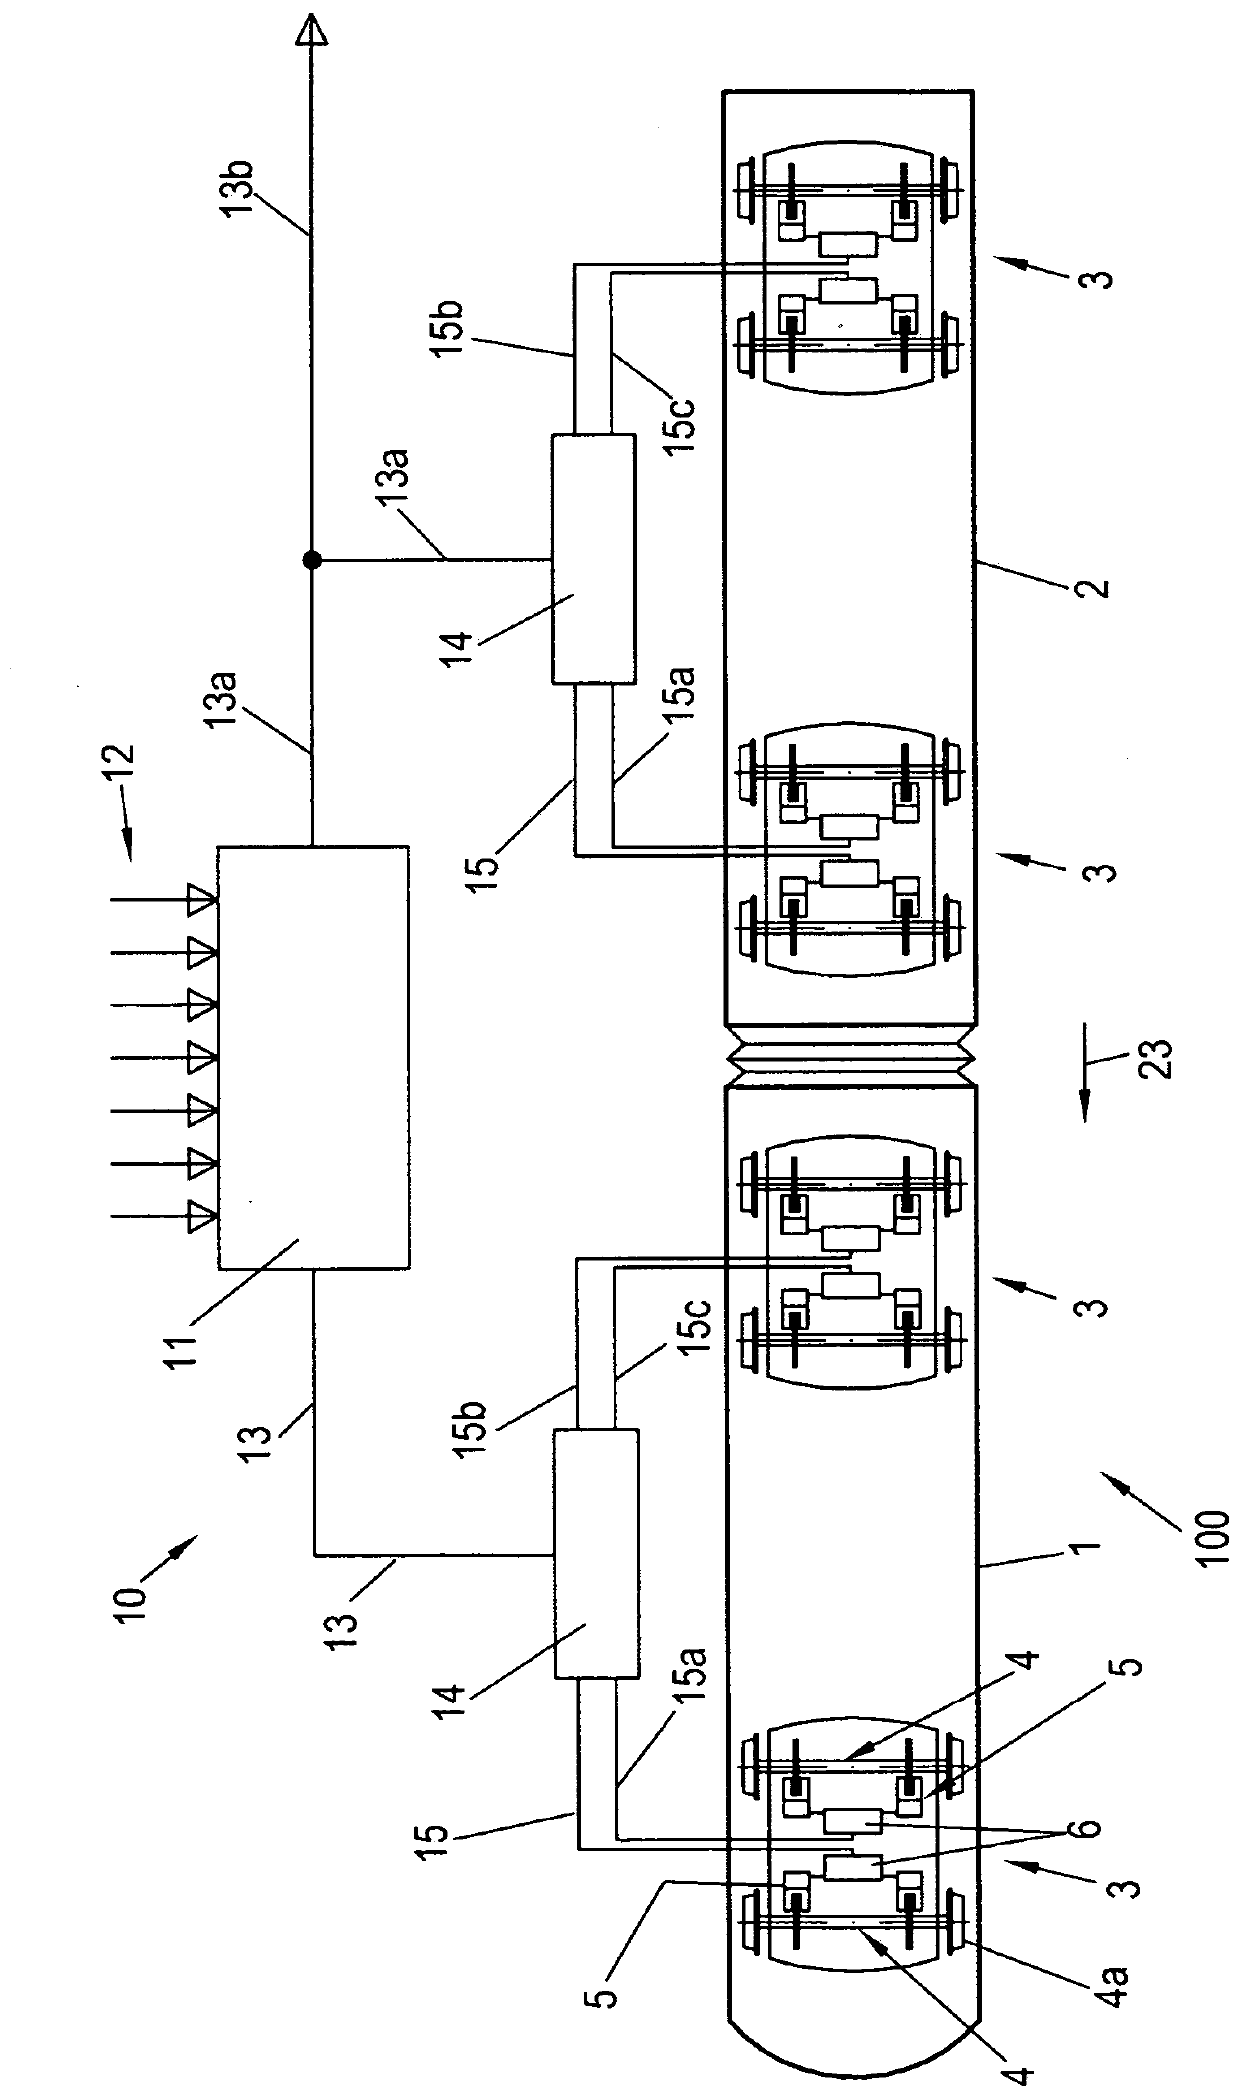 Rail vehicle braking system, adjustment device and method for operating the adjustment device